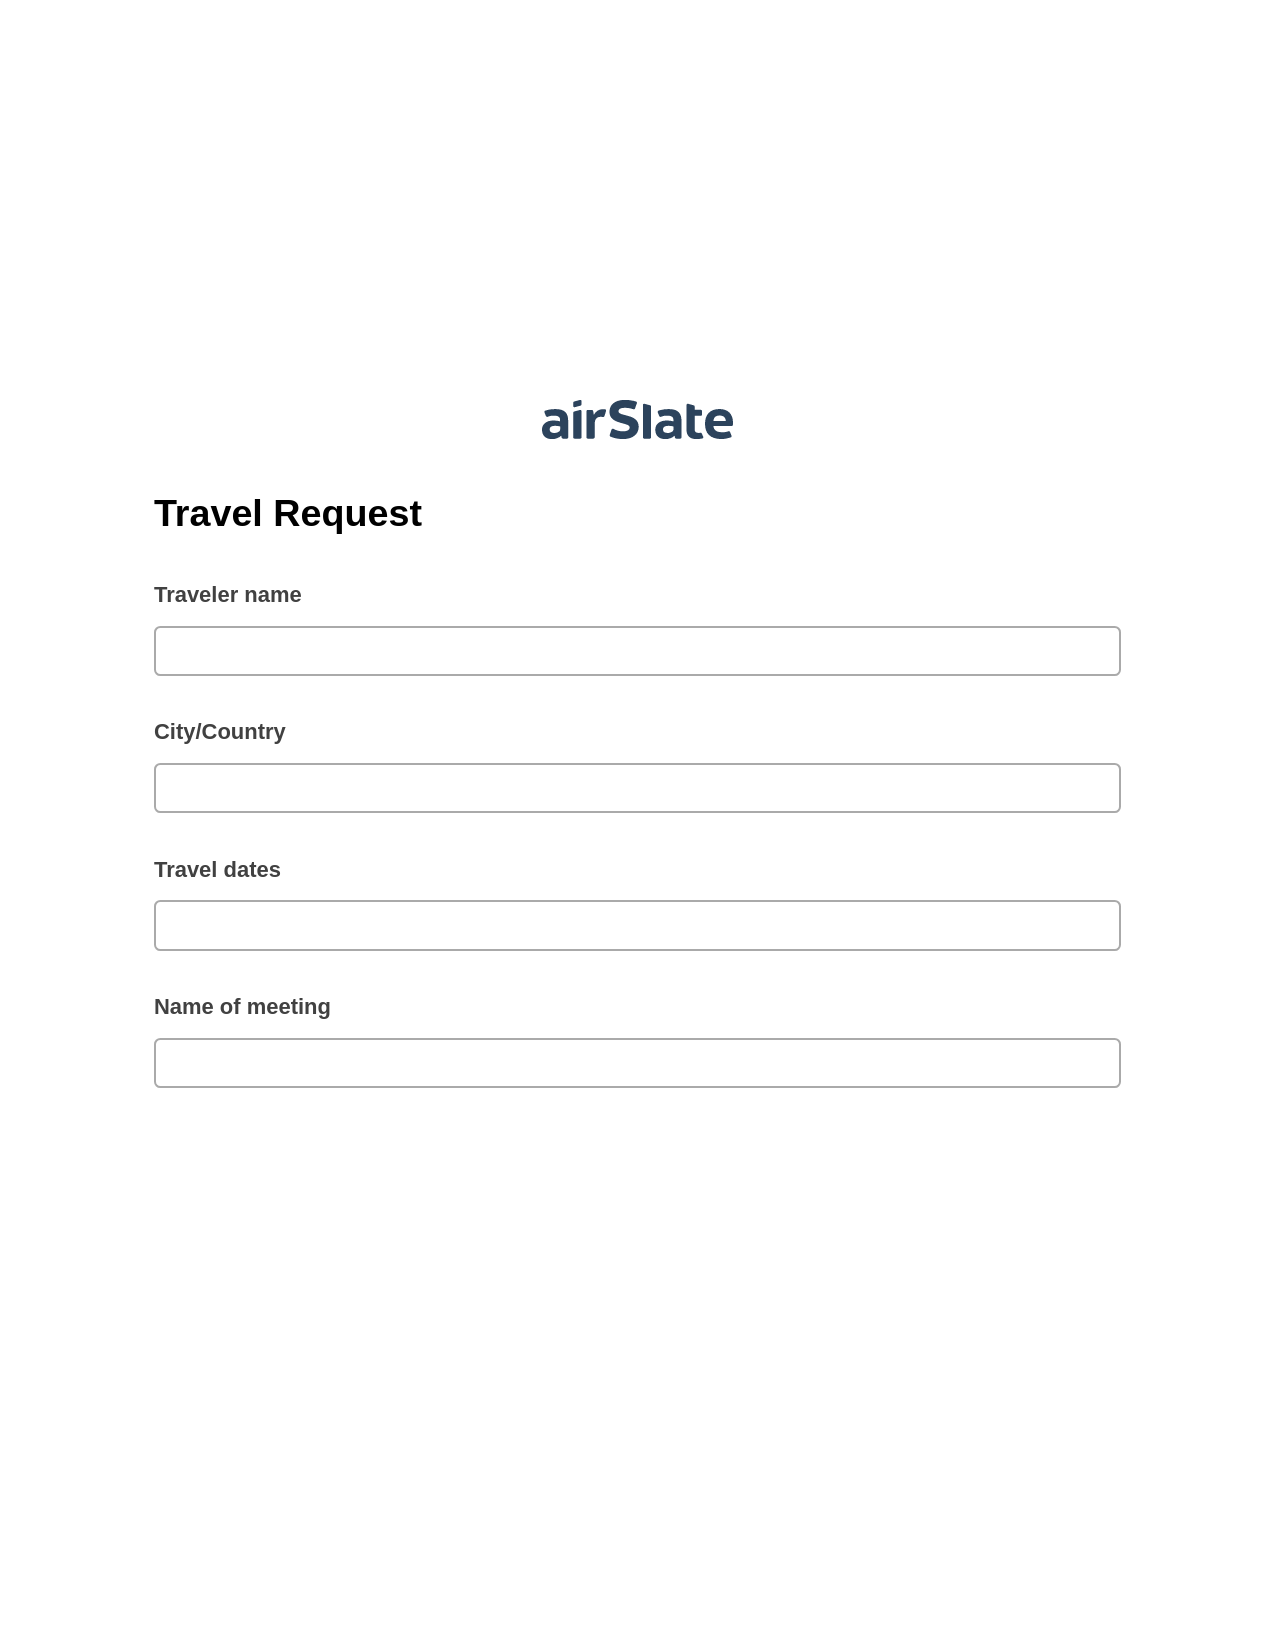 Travel Request Pre-fill from NetSuite Records Bot, Create slate addon, Export to Smartsheet